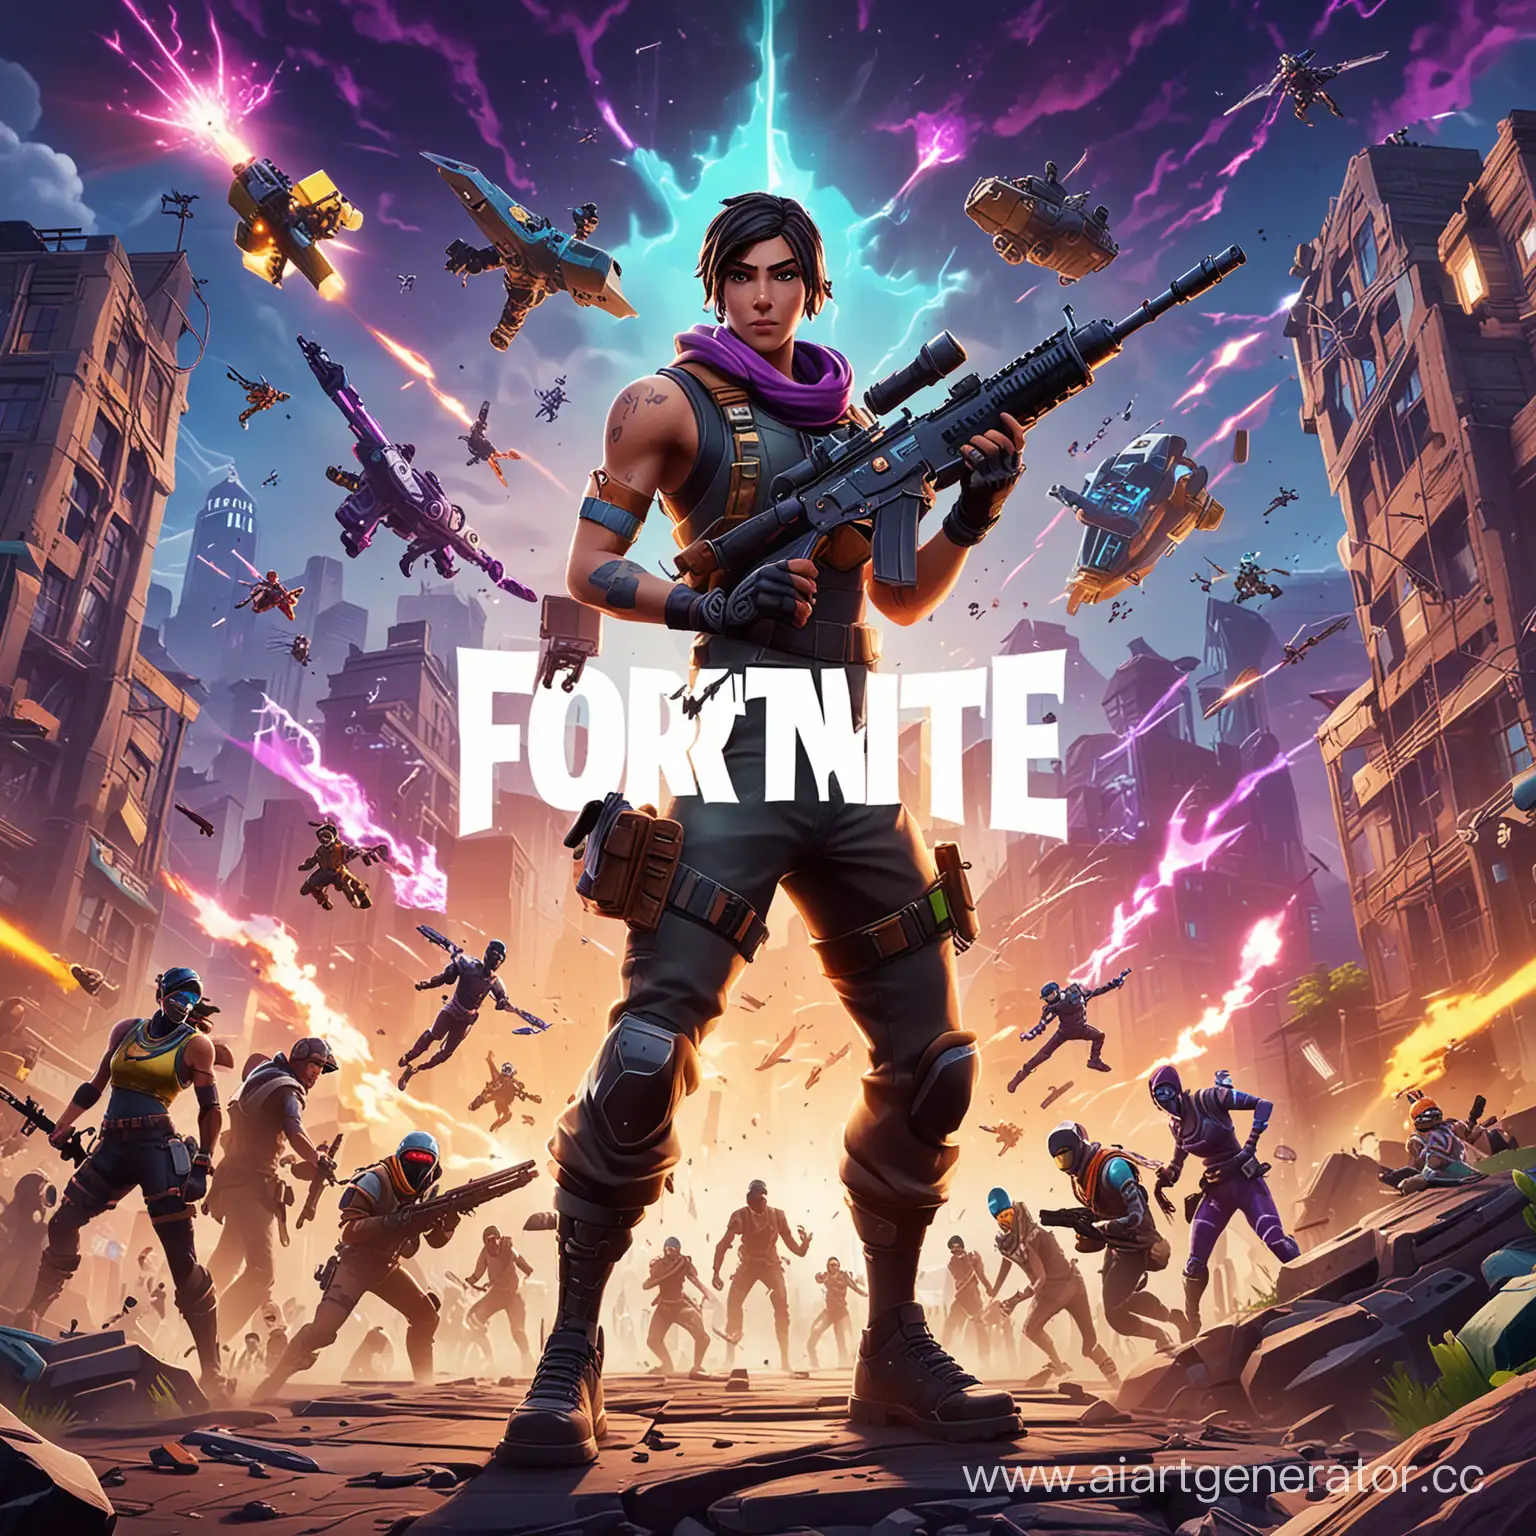 Epic-Fortnite-Battle-Scene-Dynamic-Action-with-Famous-Game-Characters